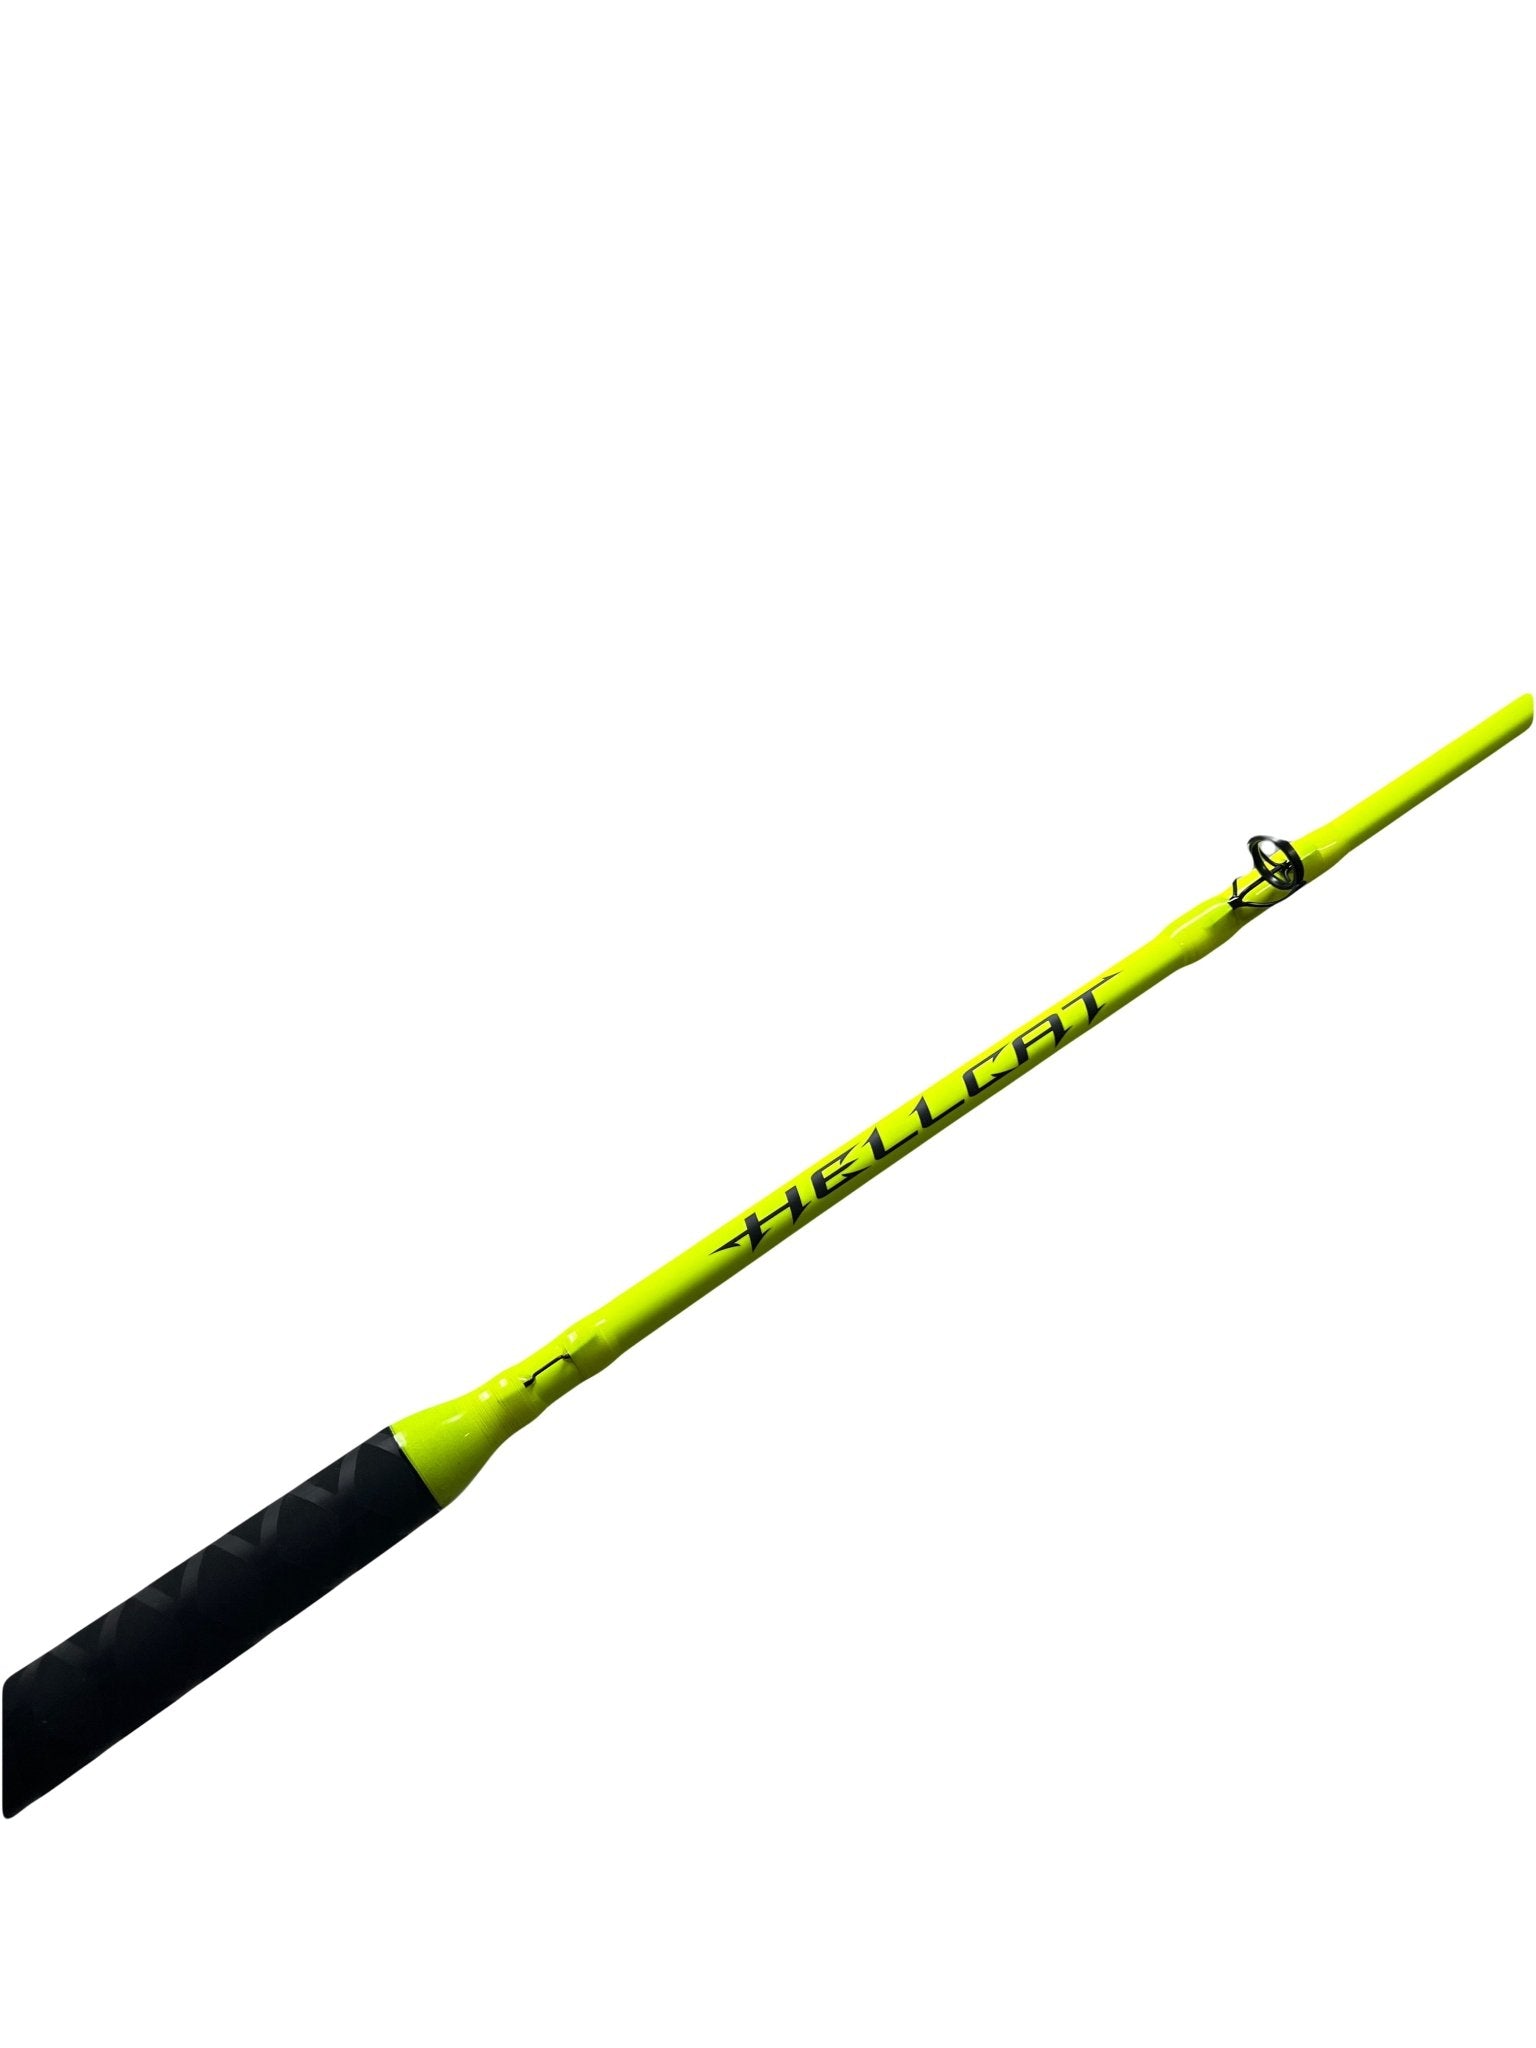 Catch the Fever 7'6" Yellow Hellcat Casting Rod - Hamilton Bait and Tackle